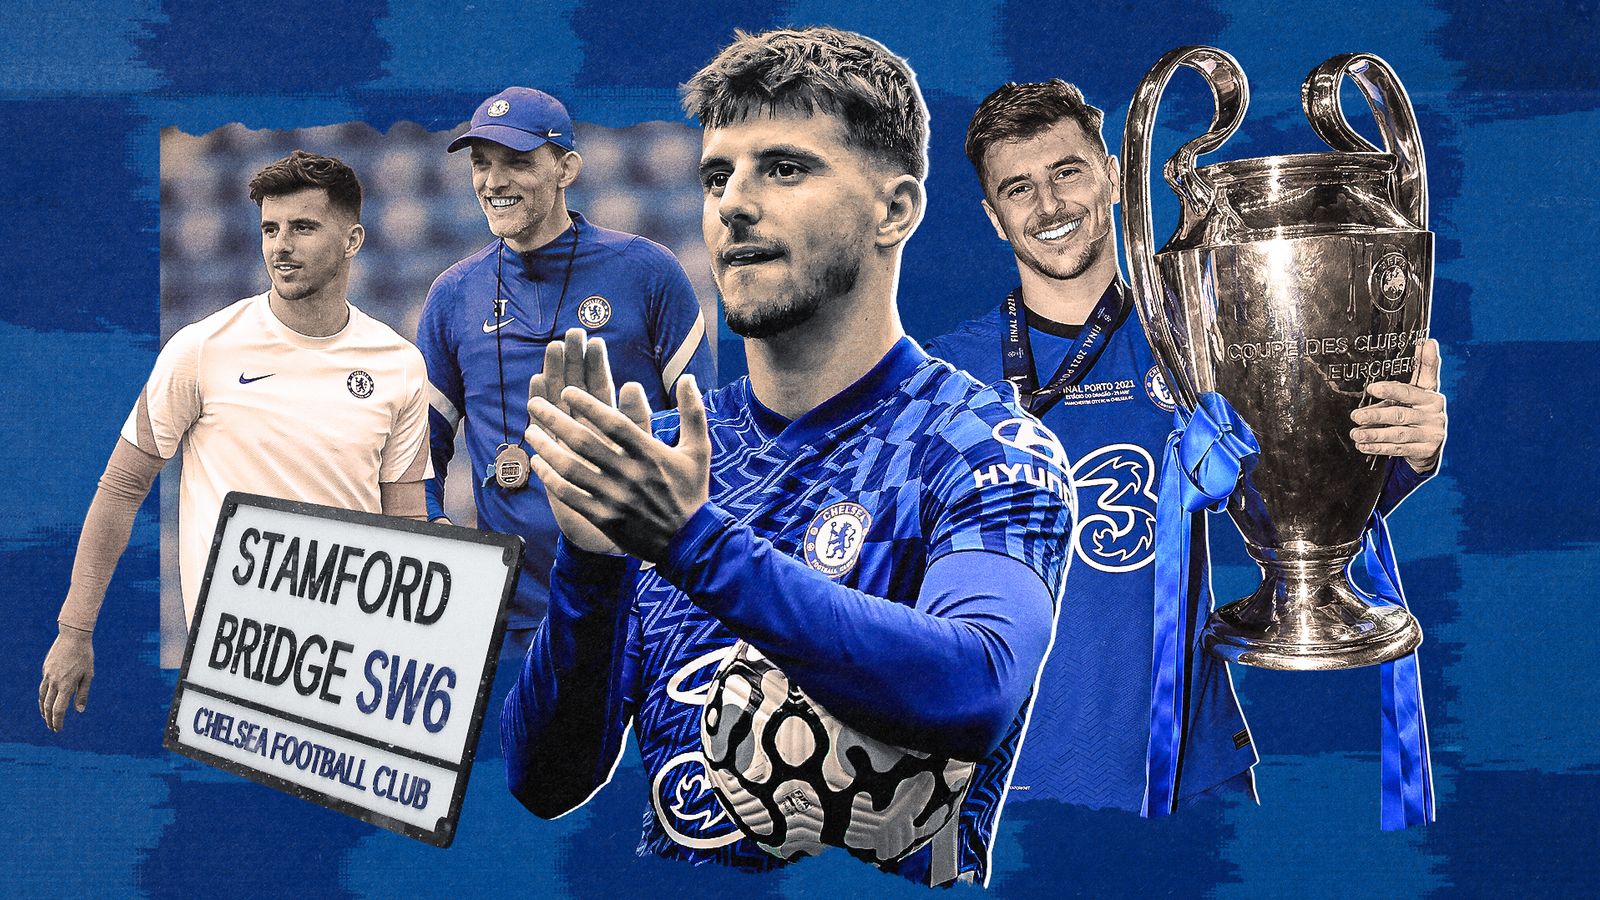 Mason Mount interview: Improvement in new role under Thomas Tuchel at Chelsea, plus tattoos, teeth and targets